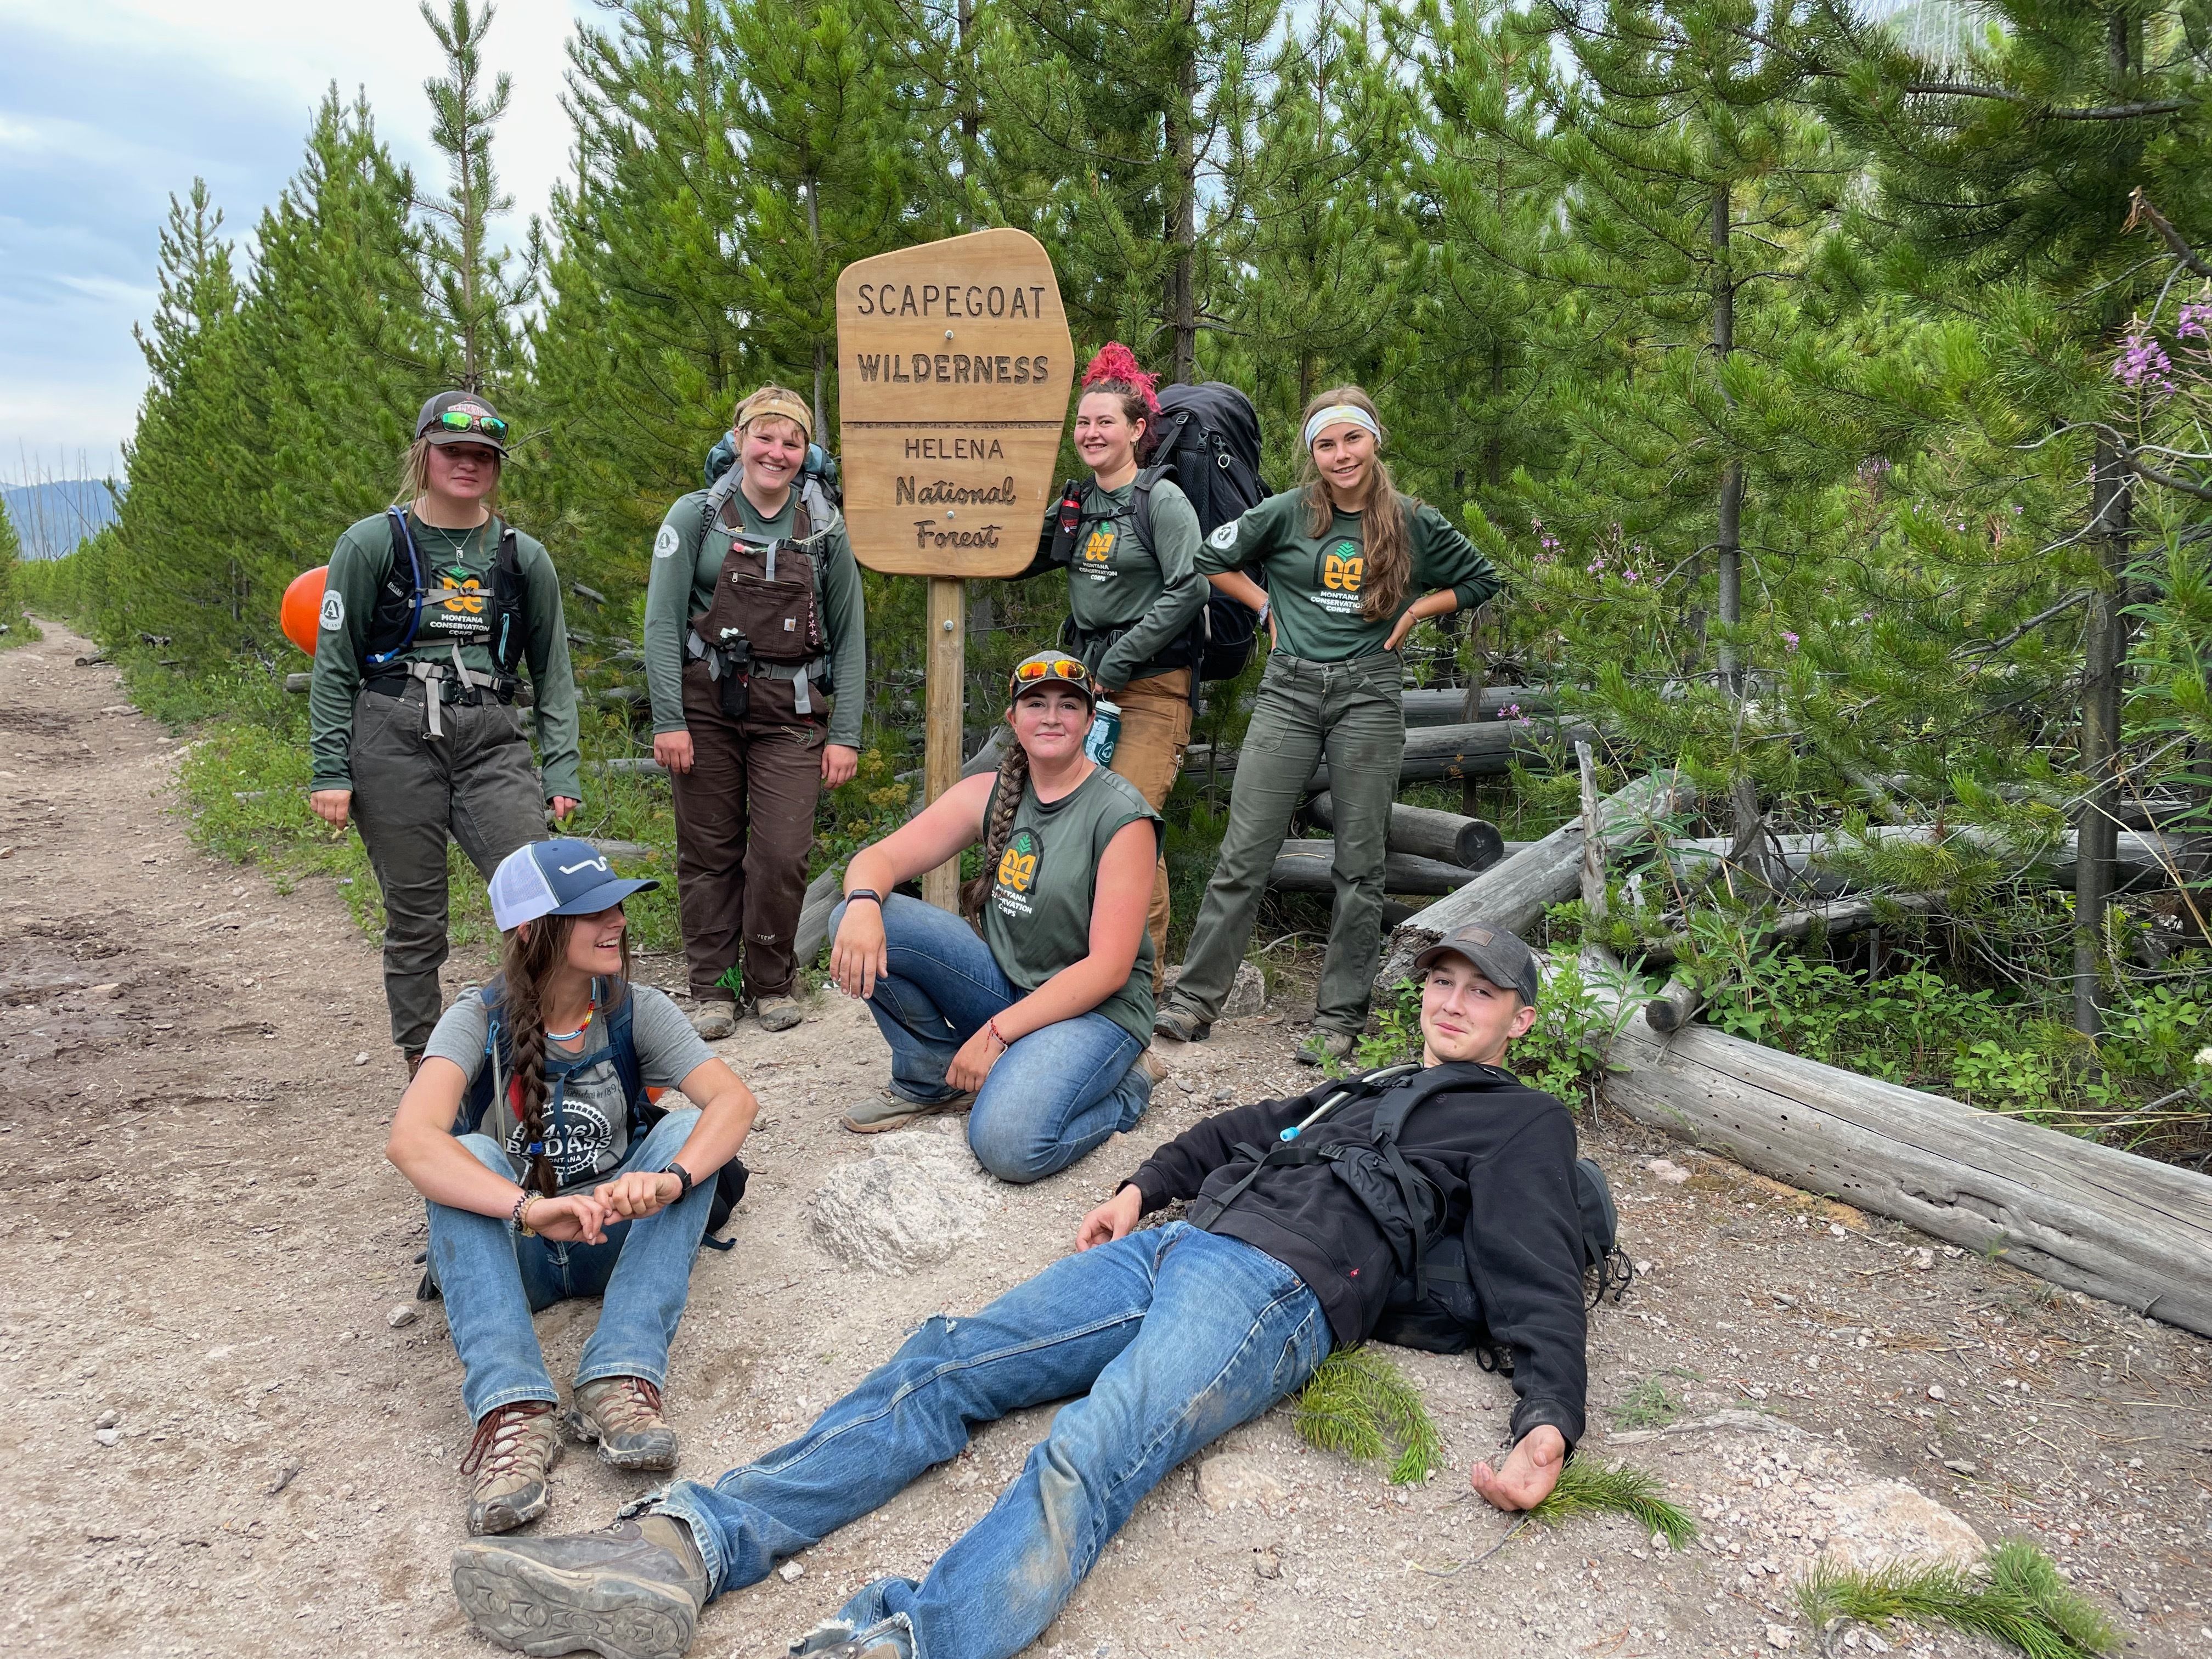 Two crew leaders and a youth crew stand by a wooden "Scapegoat Wilderness" sign